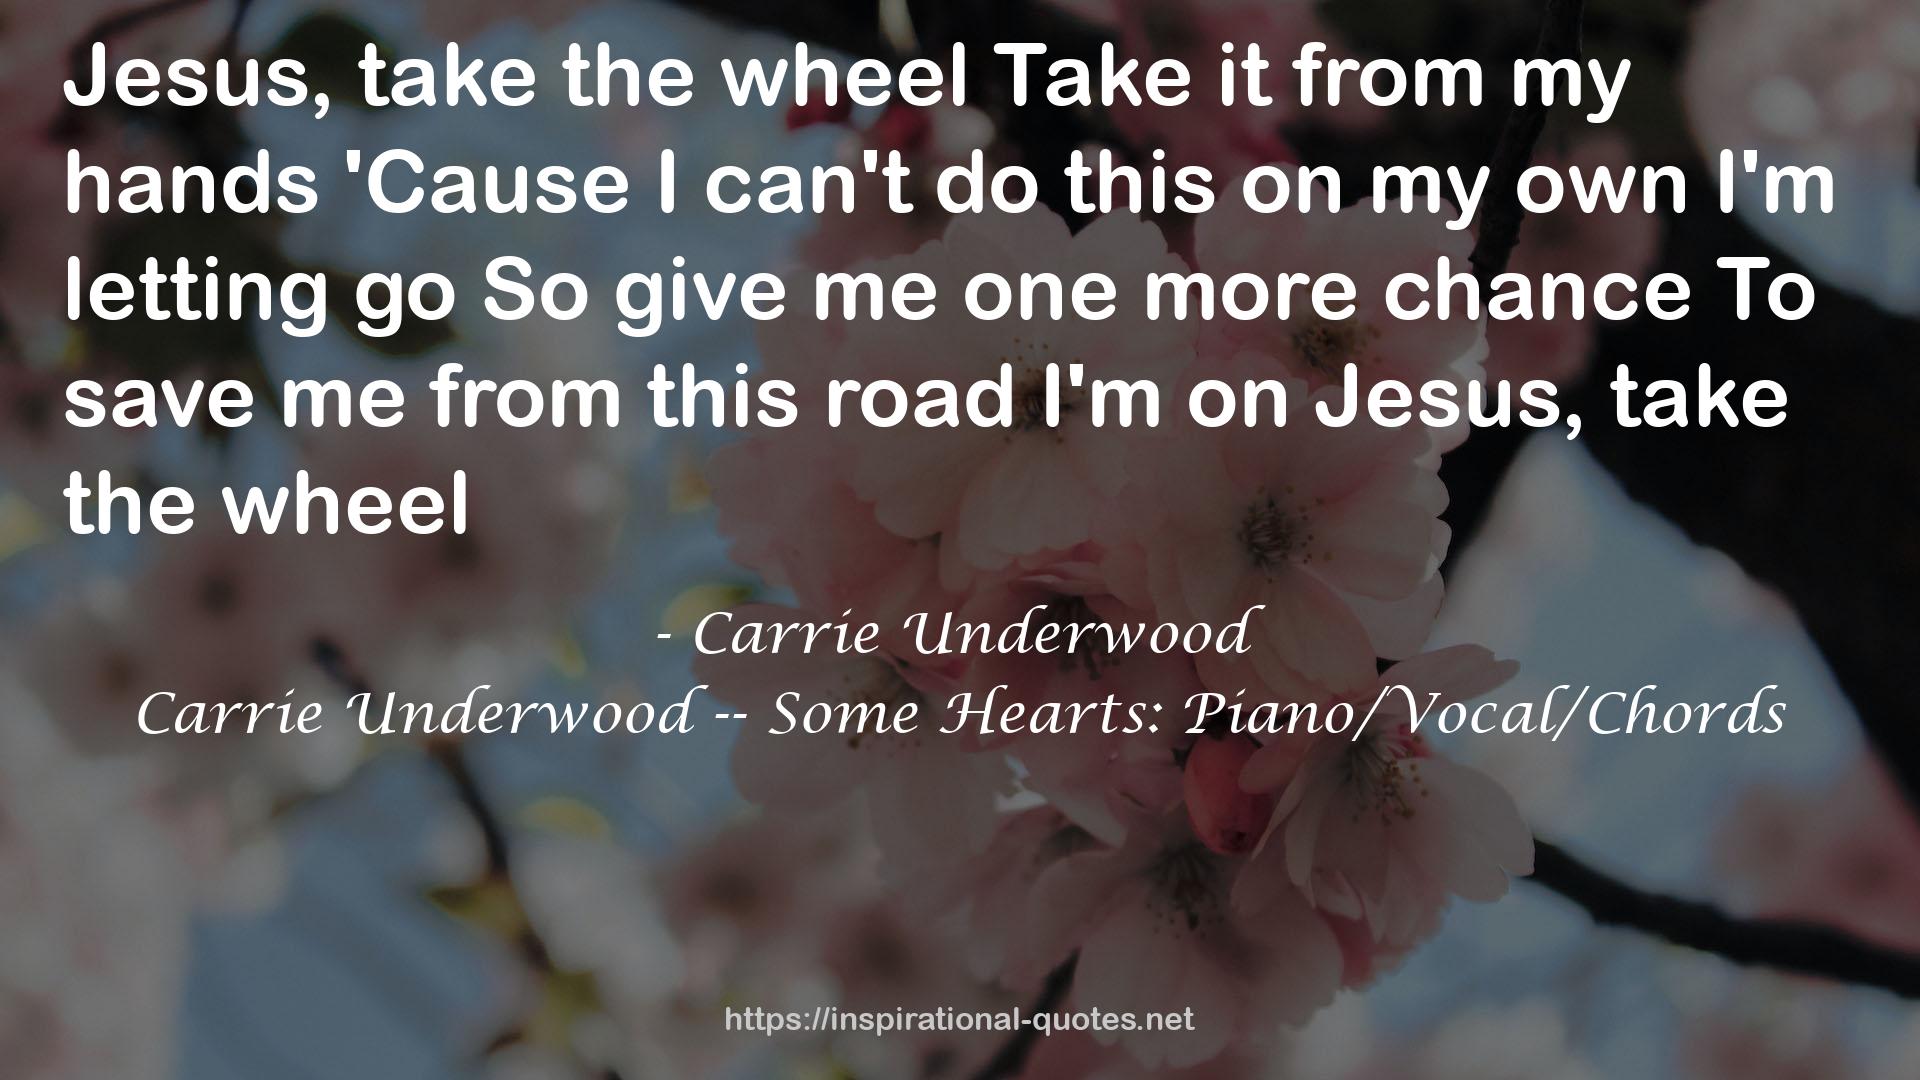 Carrie Underwood -- Some Hearts: Piano/Vocal/Chords QUOTES